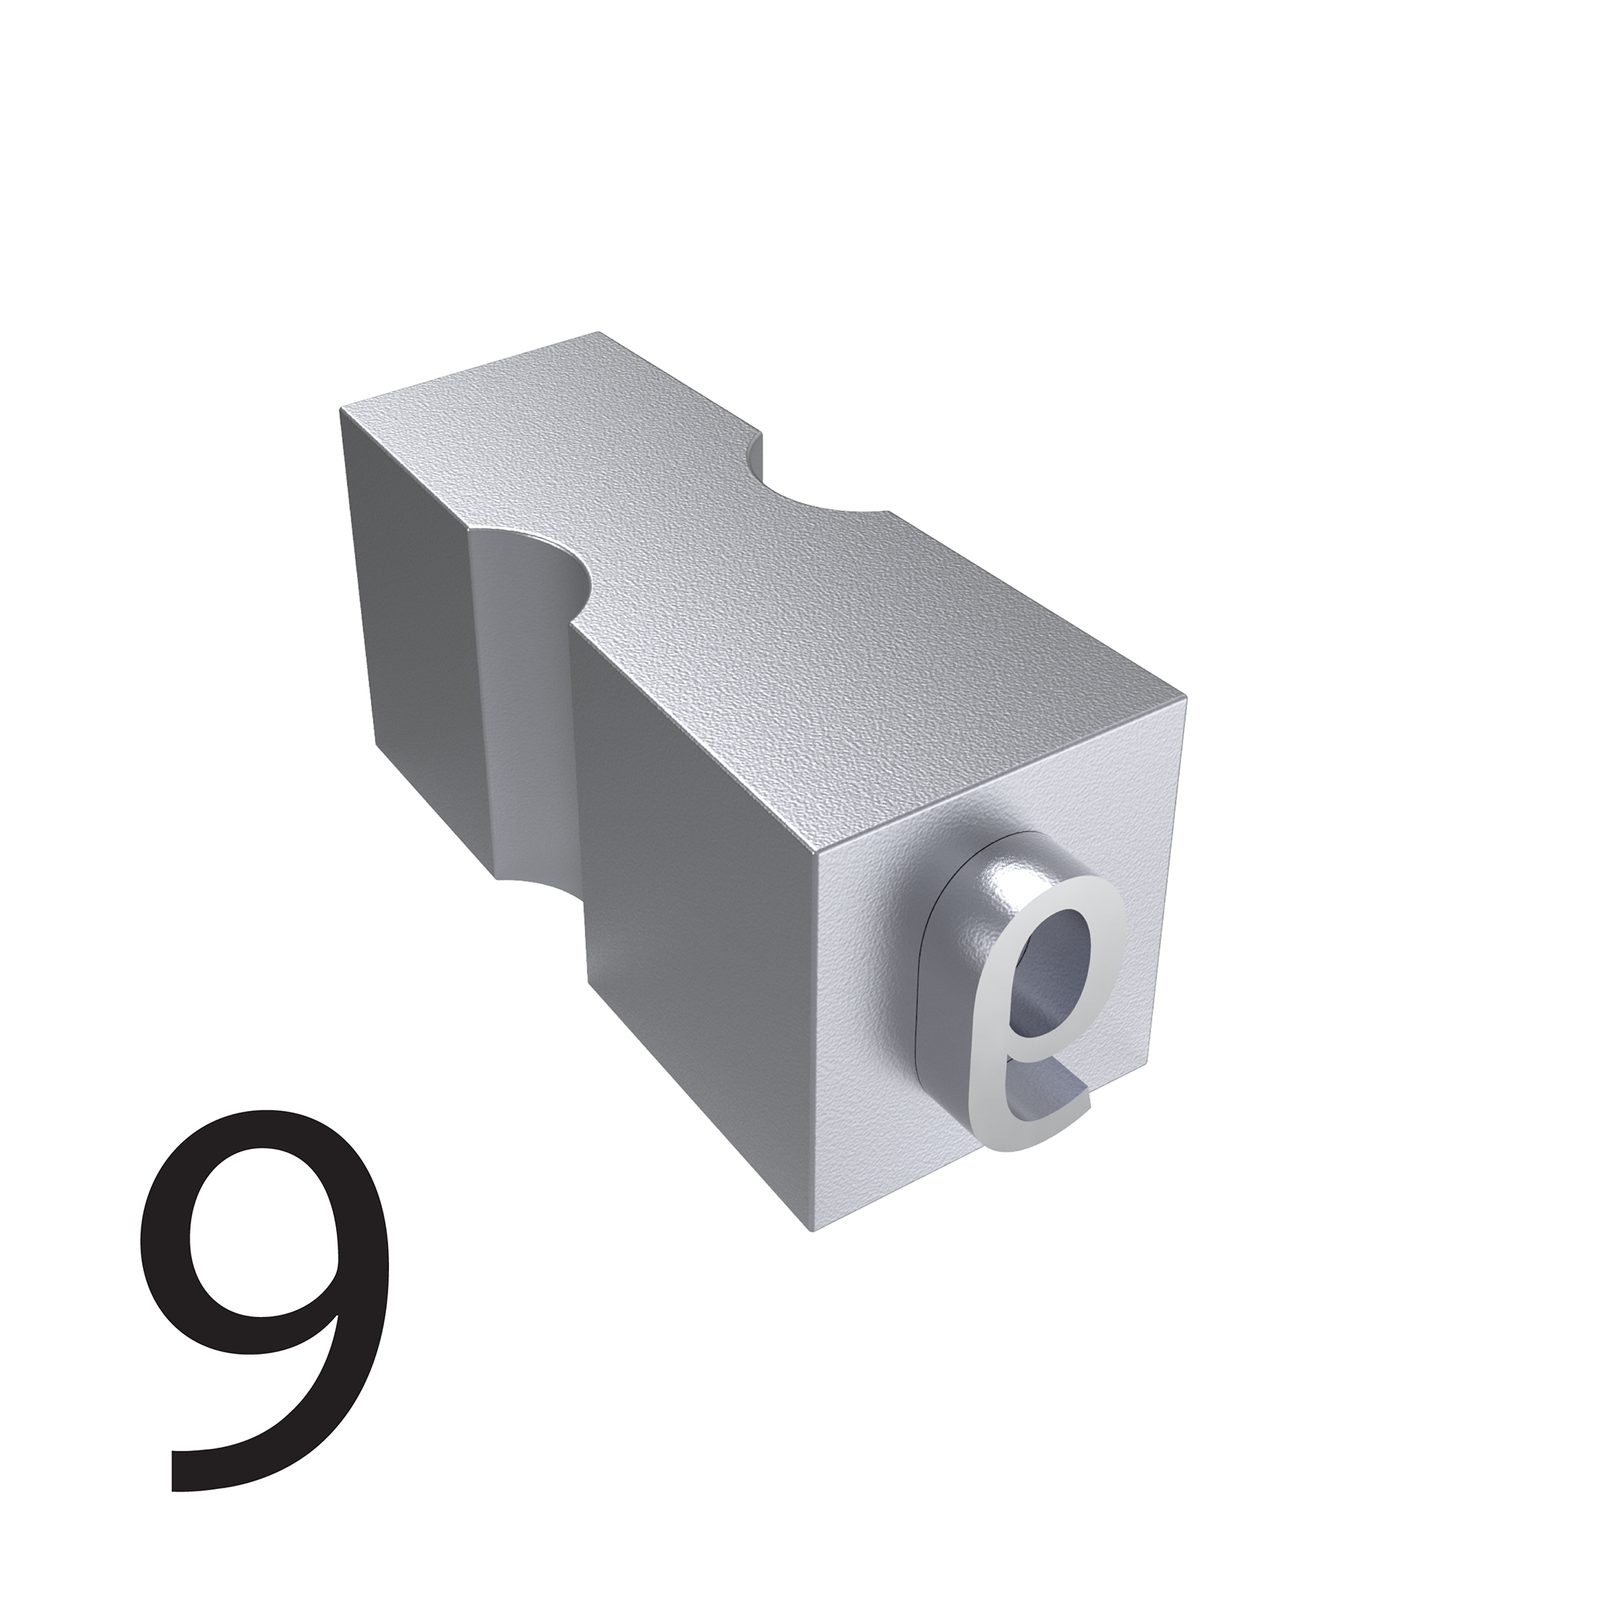 Type of number 9 for hot roll printers